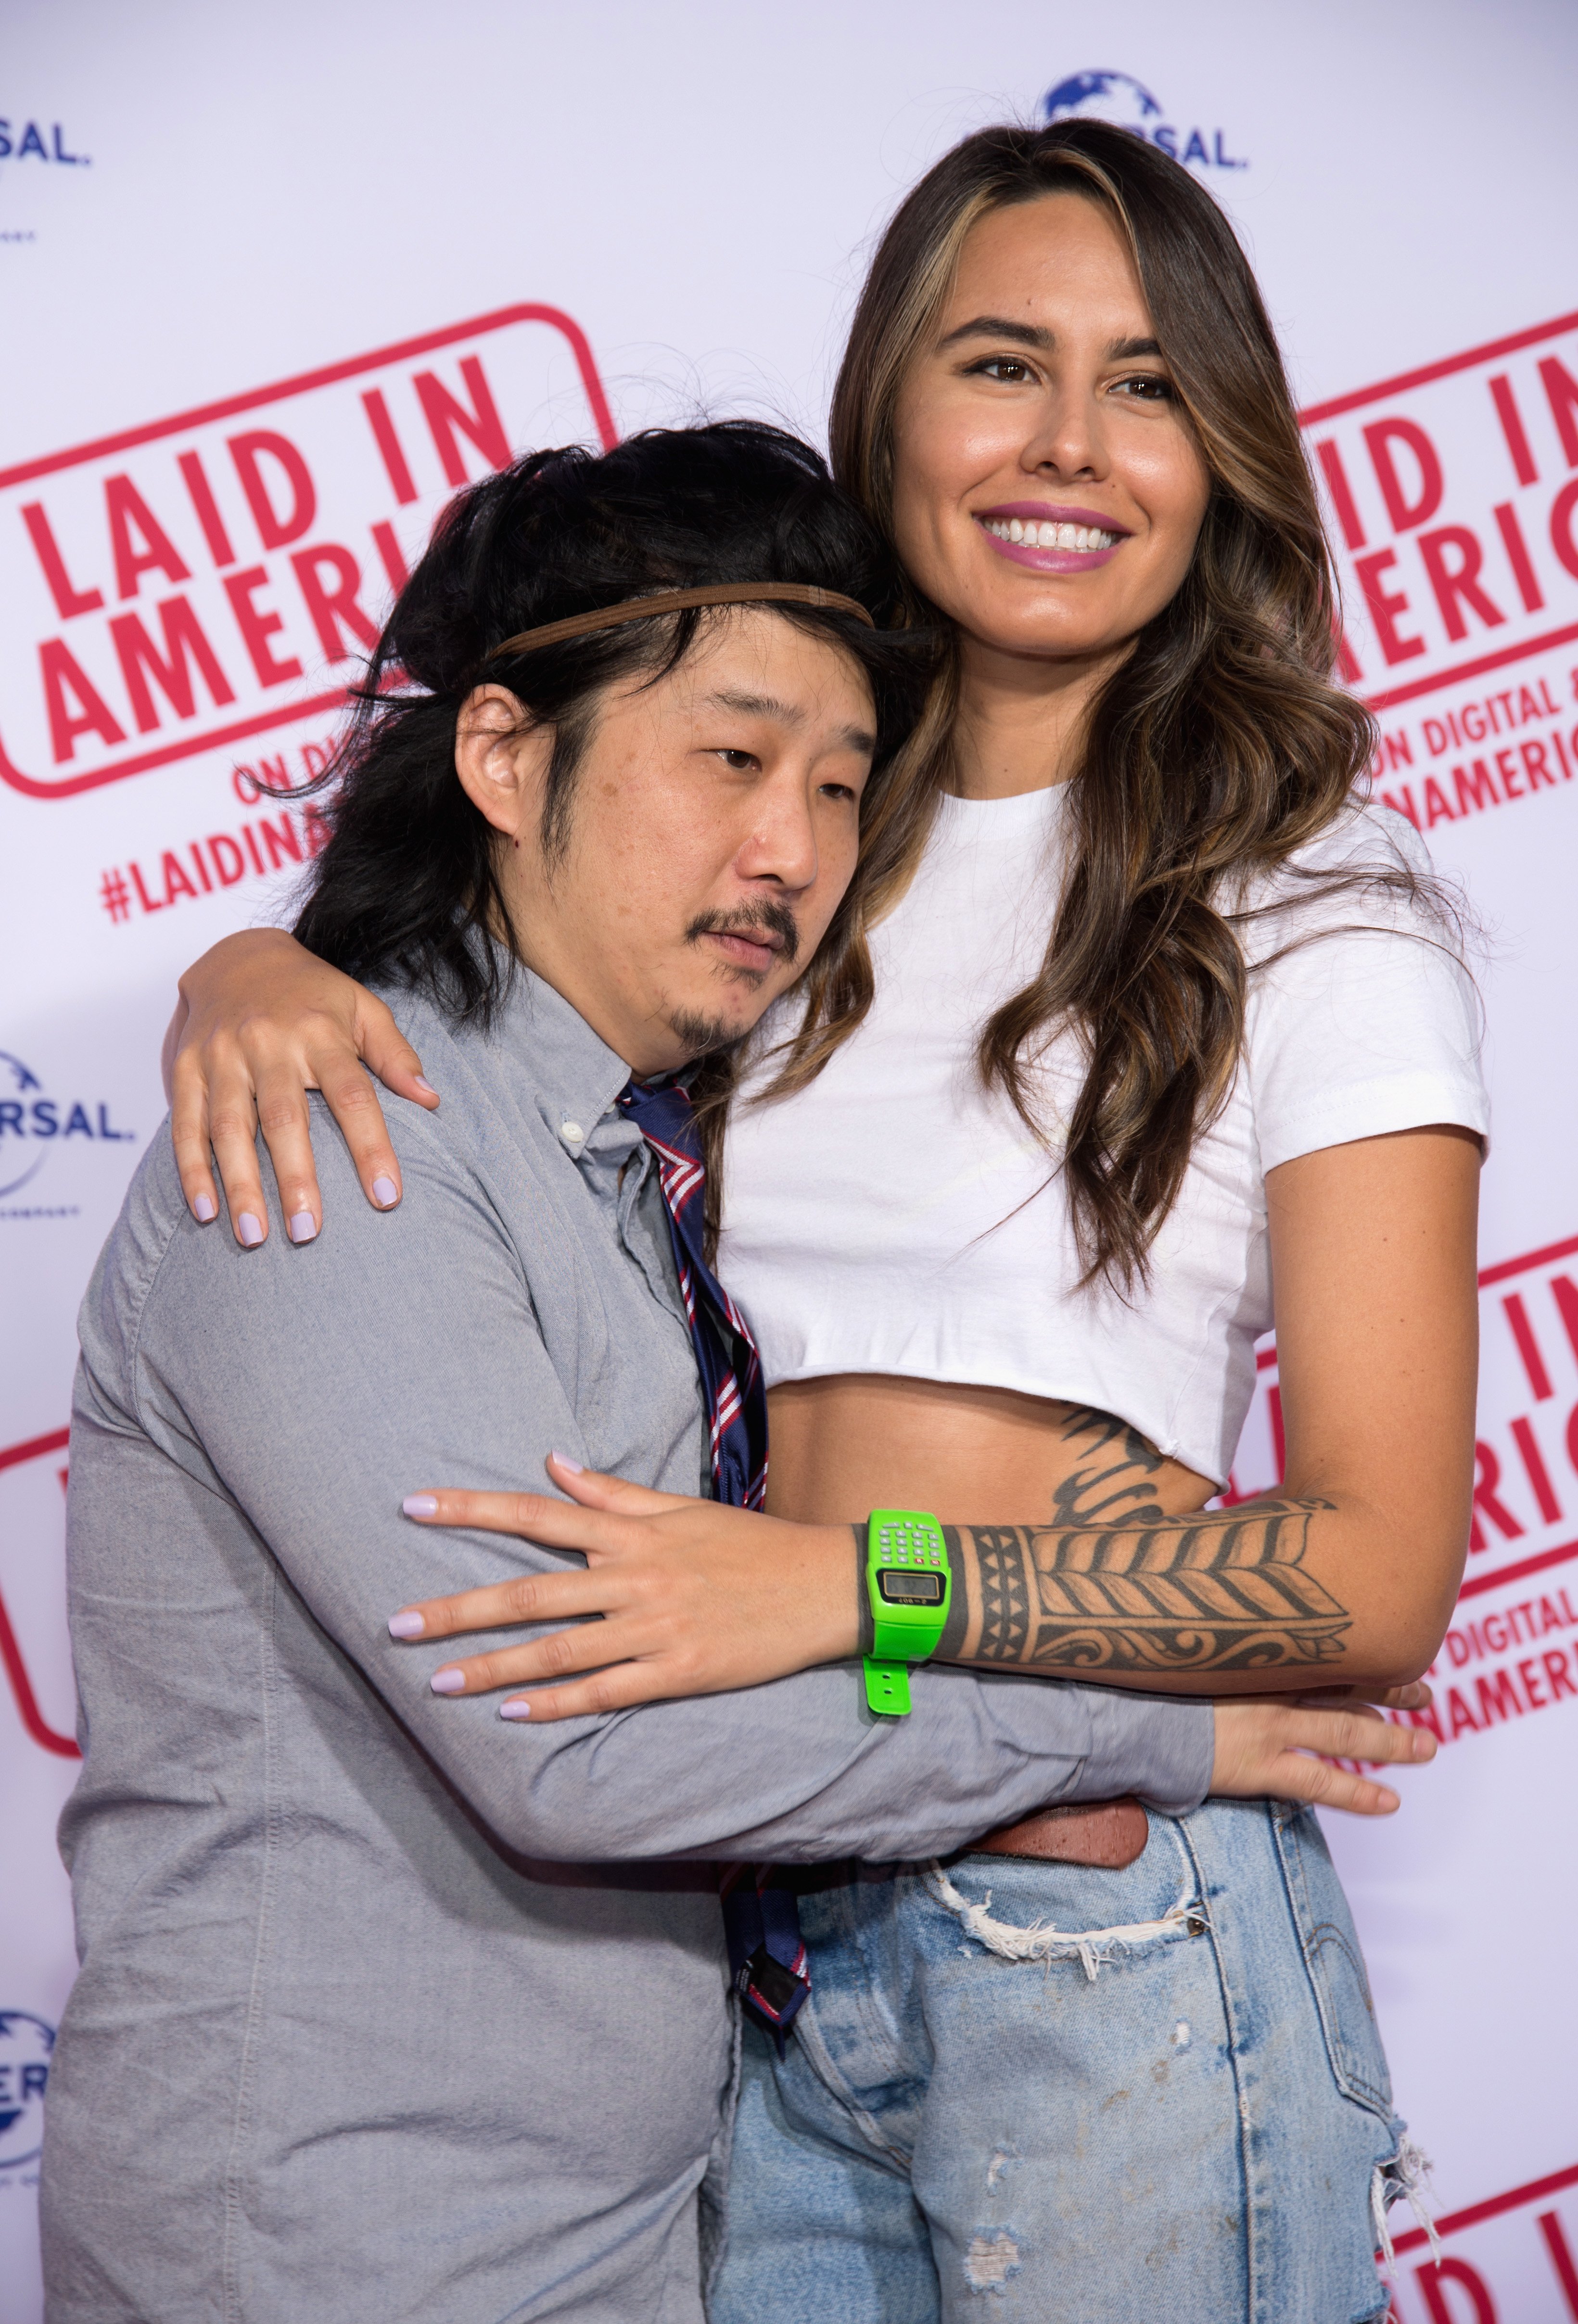 Bobby Lee and Khalyla at the "Laid In America" premiere at AMC Universal City Walk in Universal City, California, on September 28, 2016. | Source: Getty Images